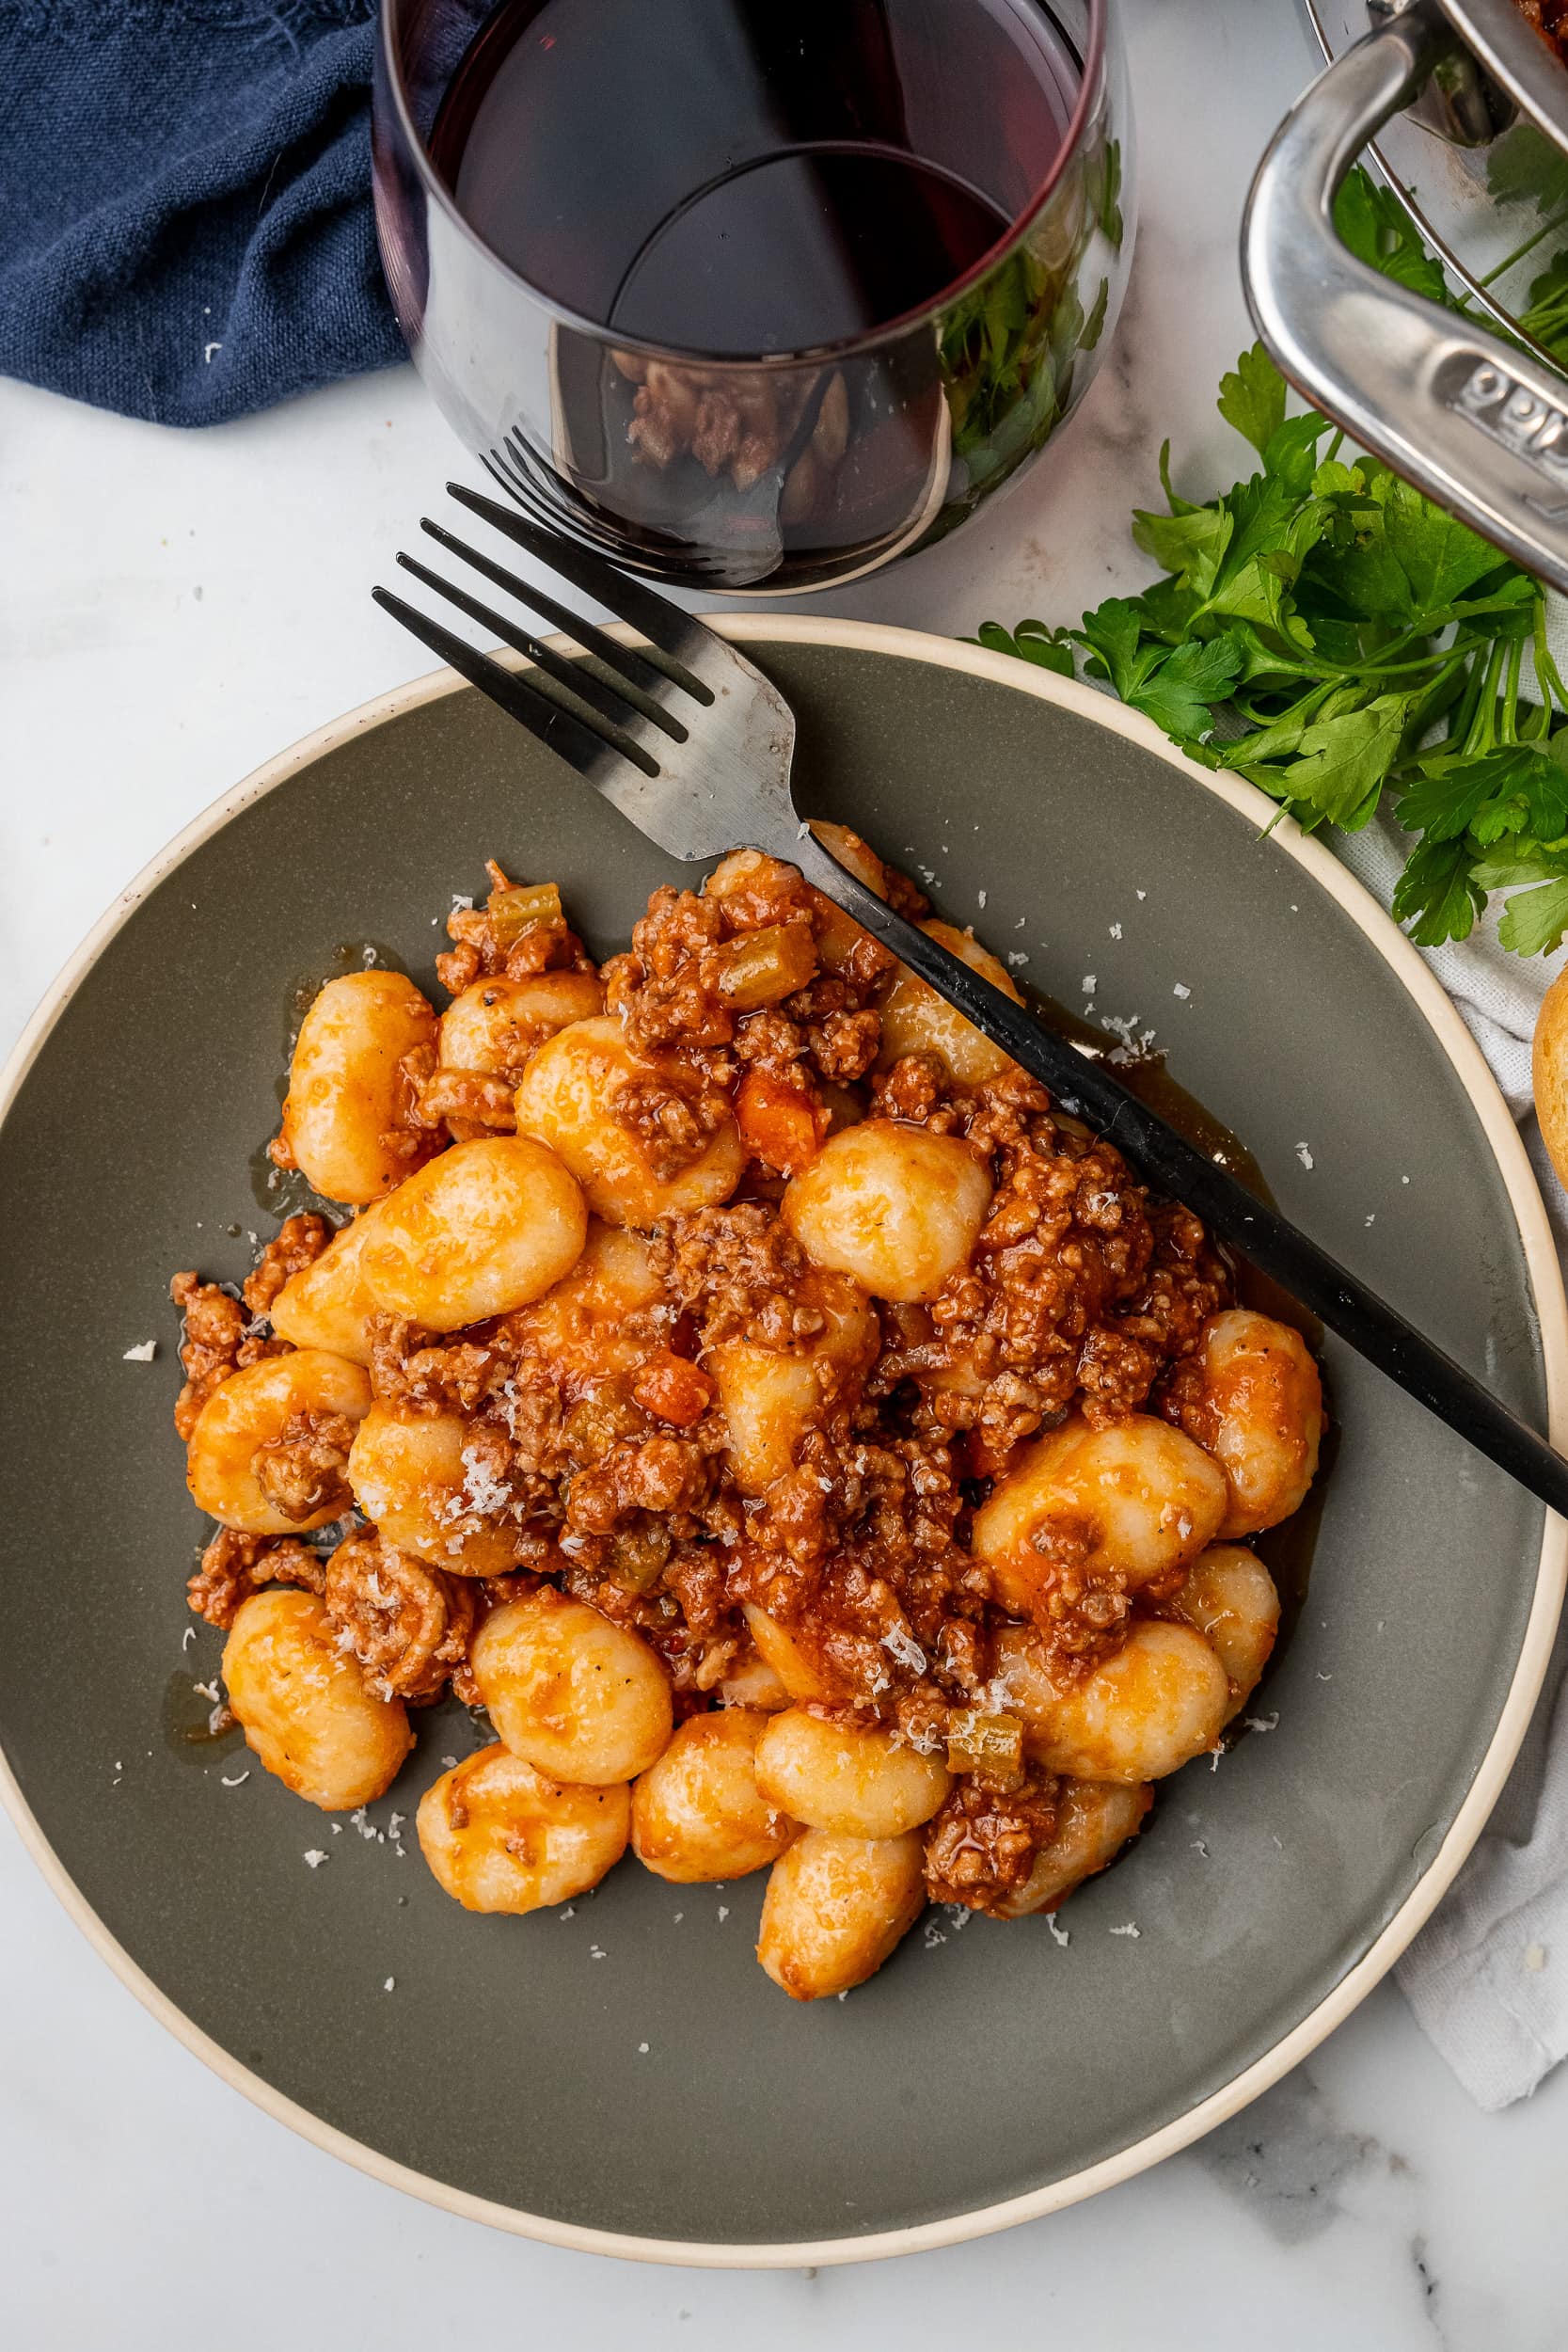 Gnocchi with Meat Sauce - Taste and Tell